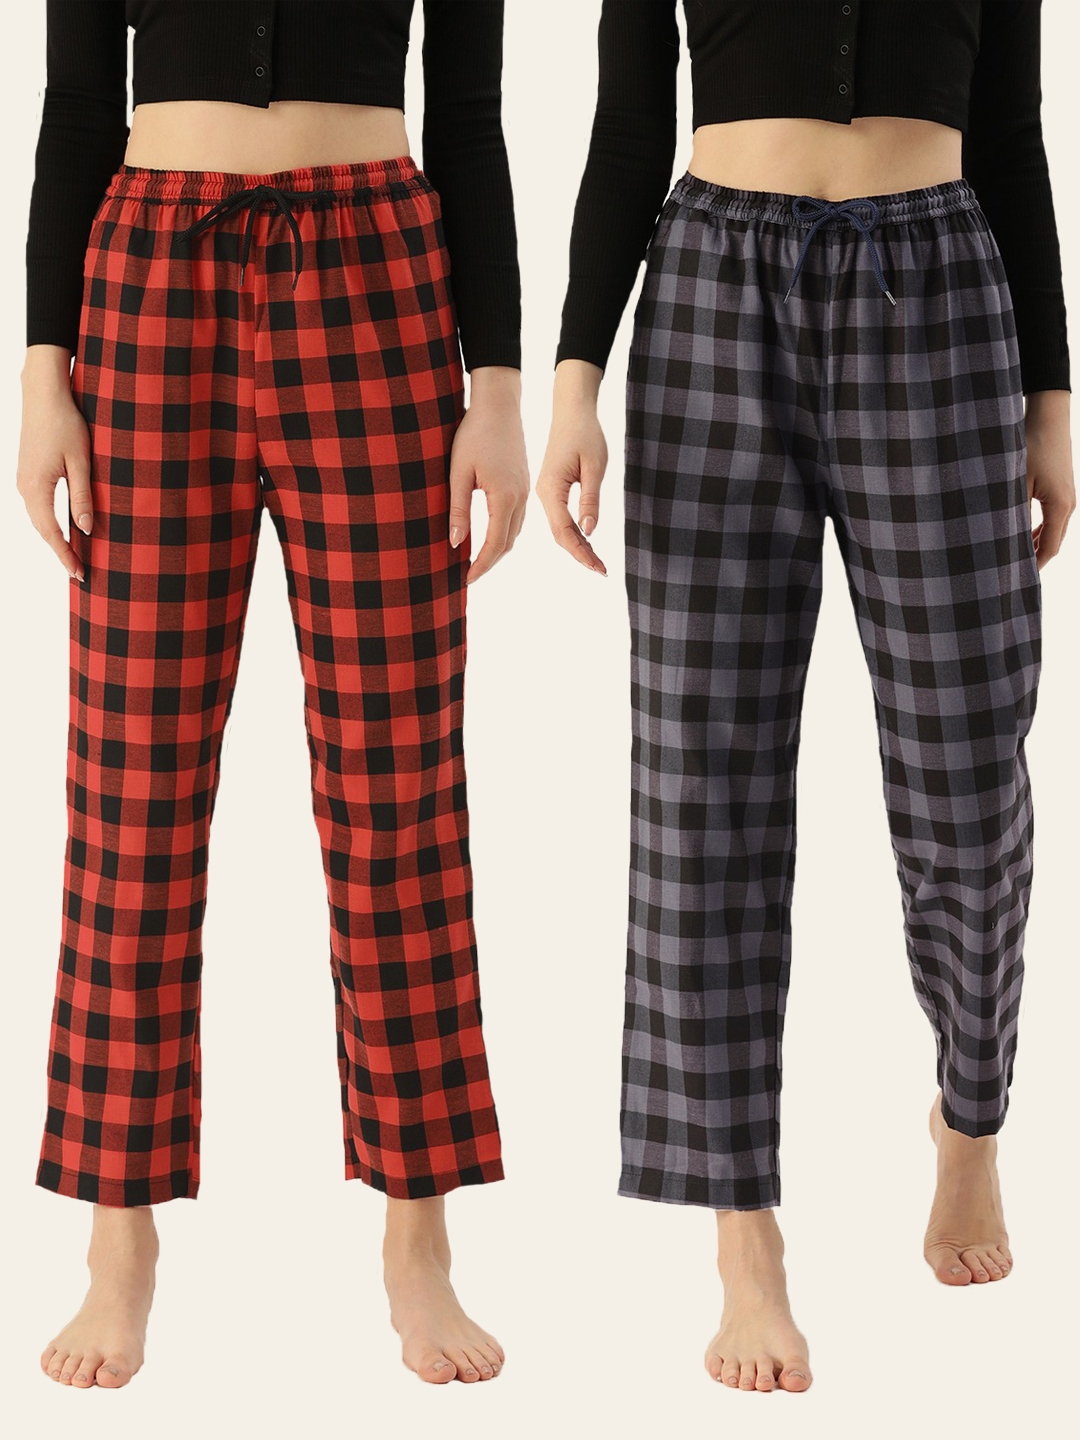 Kryptic | Kryptic Women's 100% Cotton Checked Printed Lounge Pants - Pack of 2